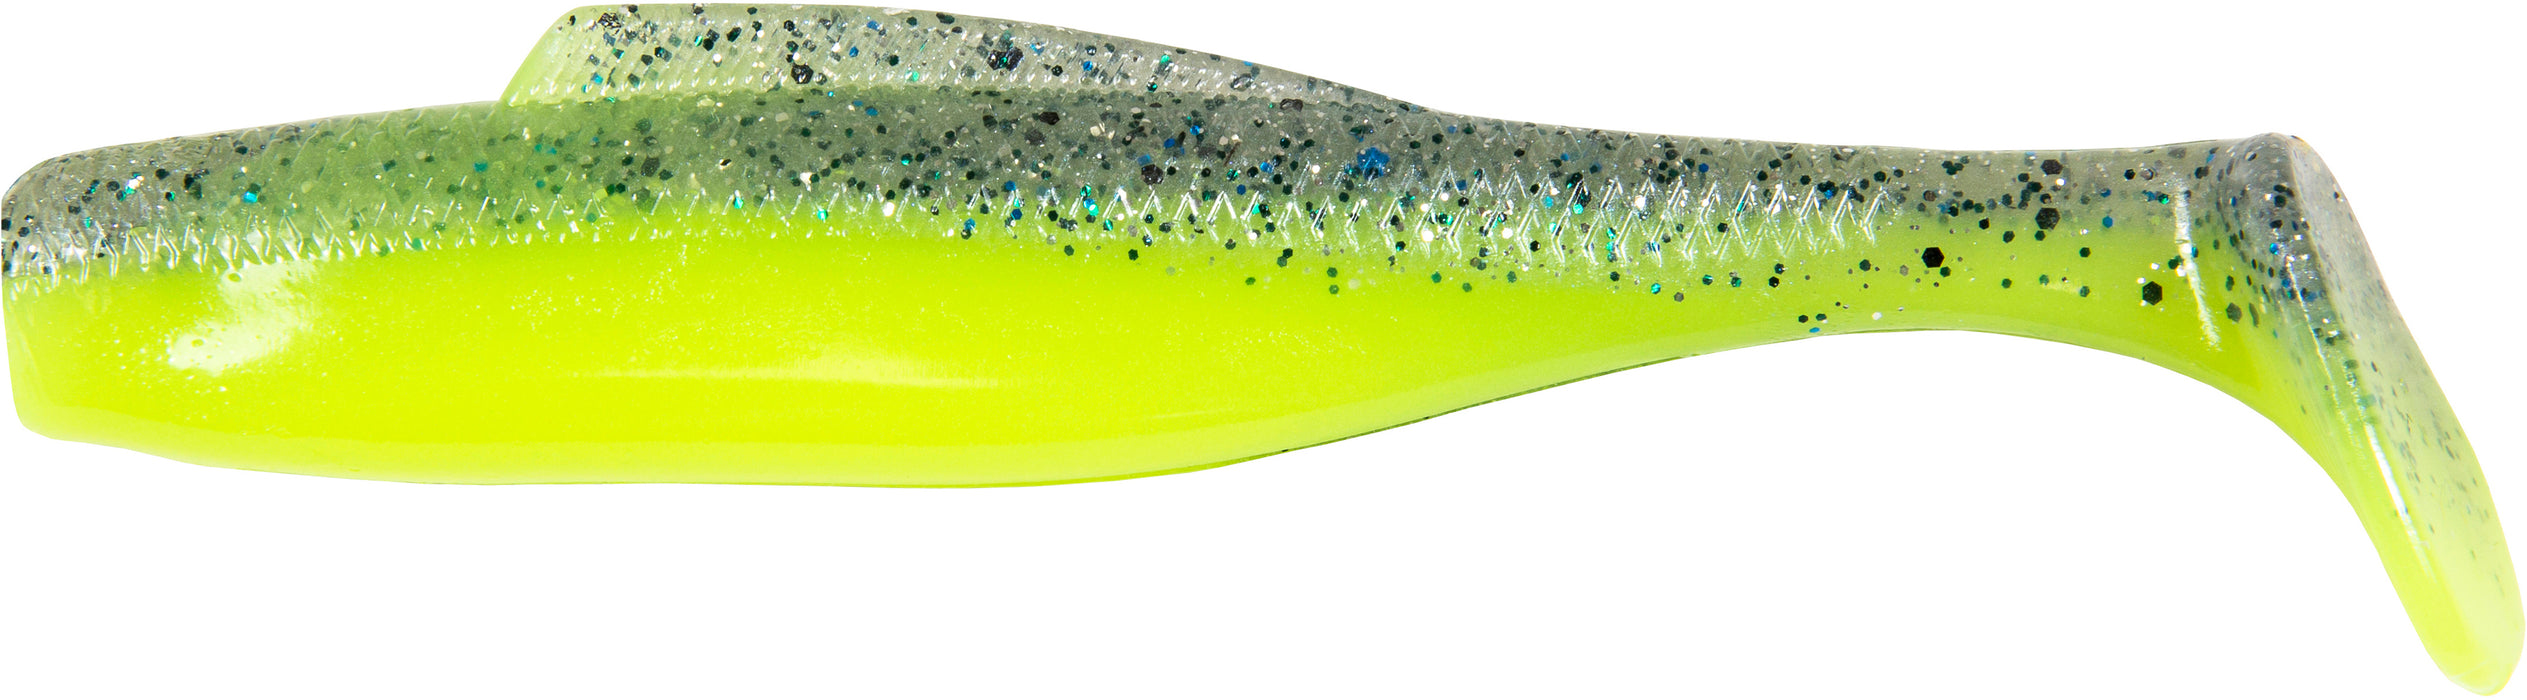 Z Man Diezel Minnowz 5 Inch Paddle Tail Swimbait 4 Pack Discount Tackle 